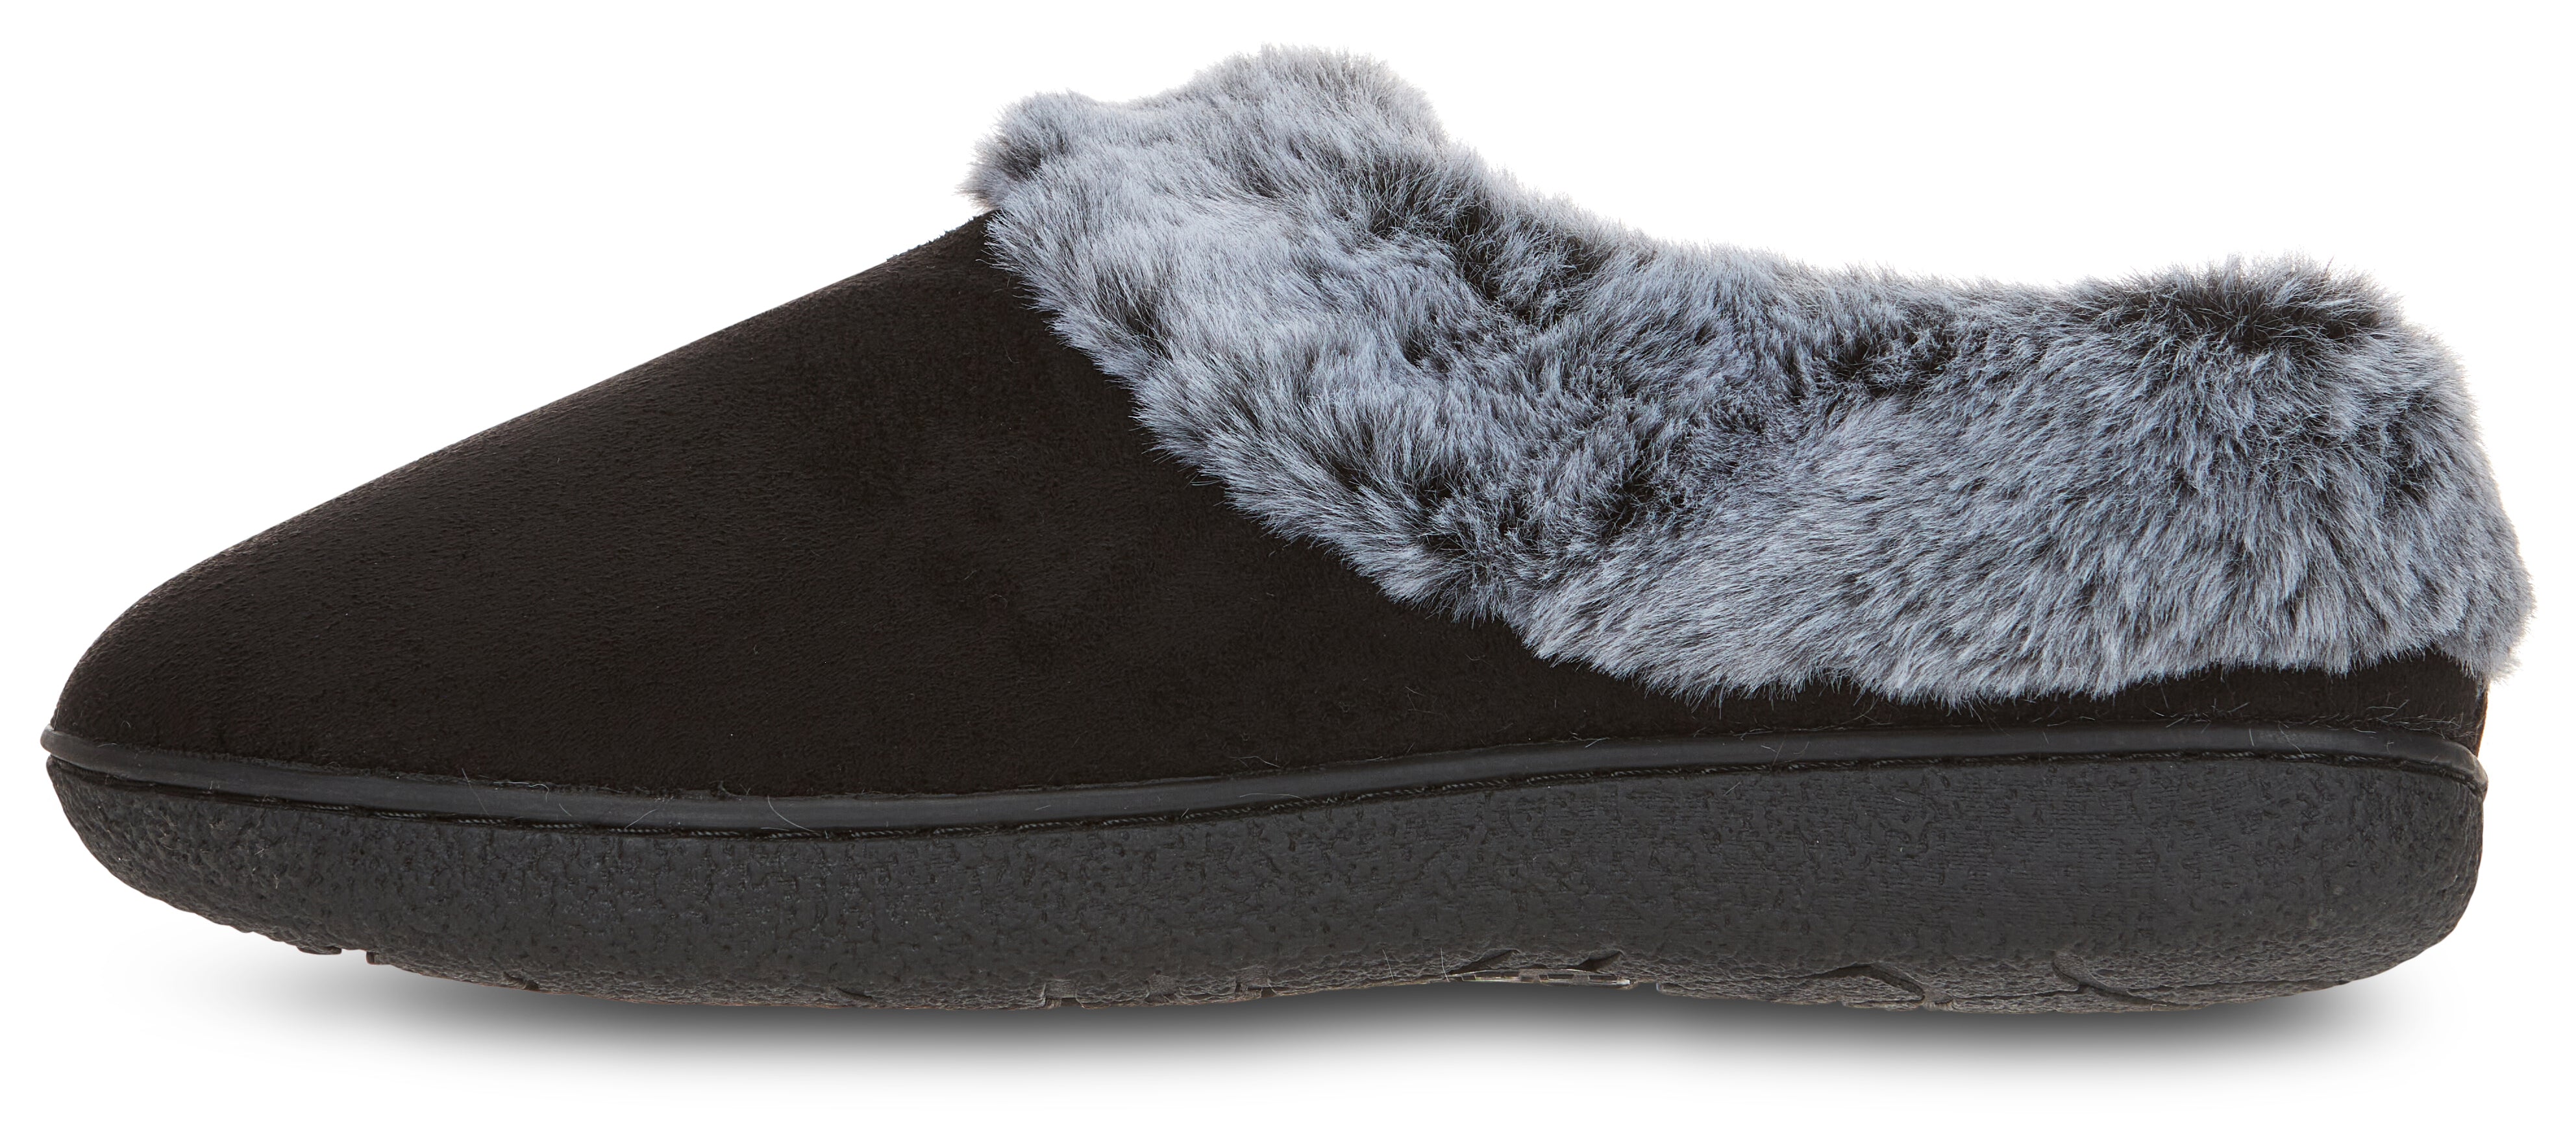 Womens Soft Classic Indoor/Outdoor Two-Tone Faux Fur Clog Slipper - Black